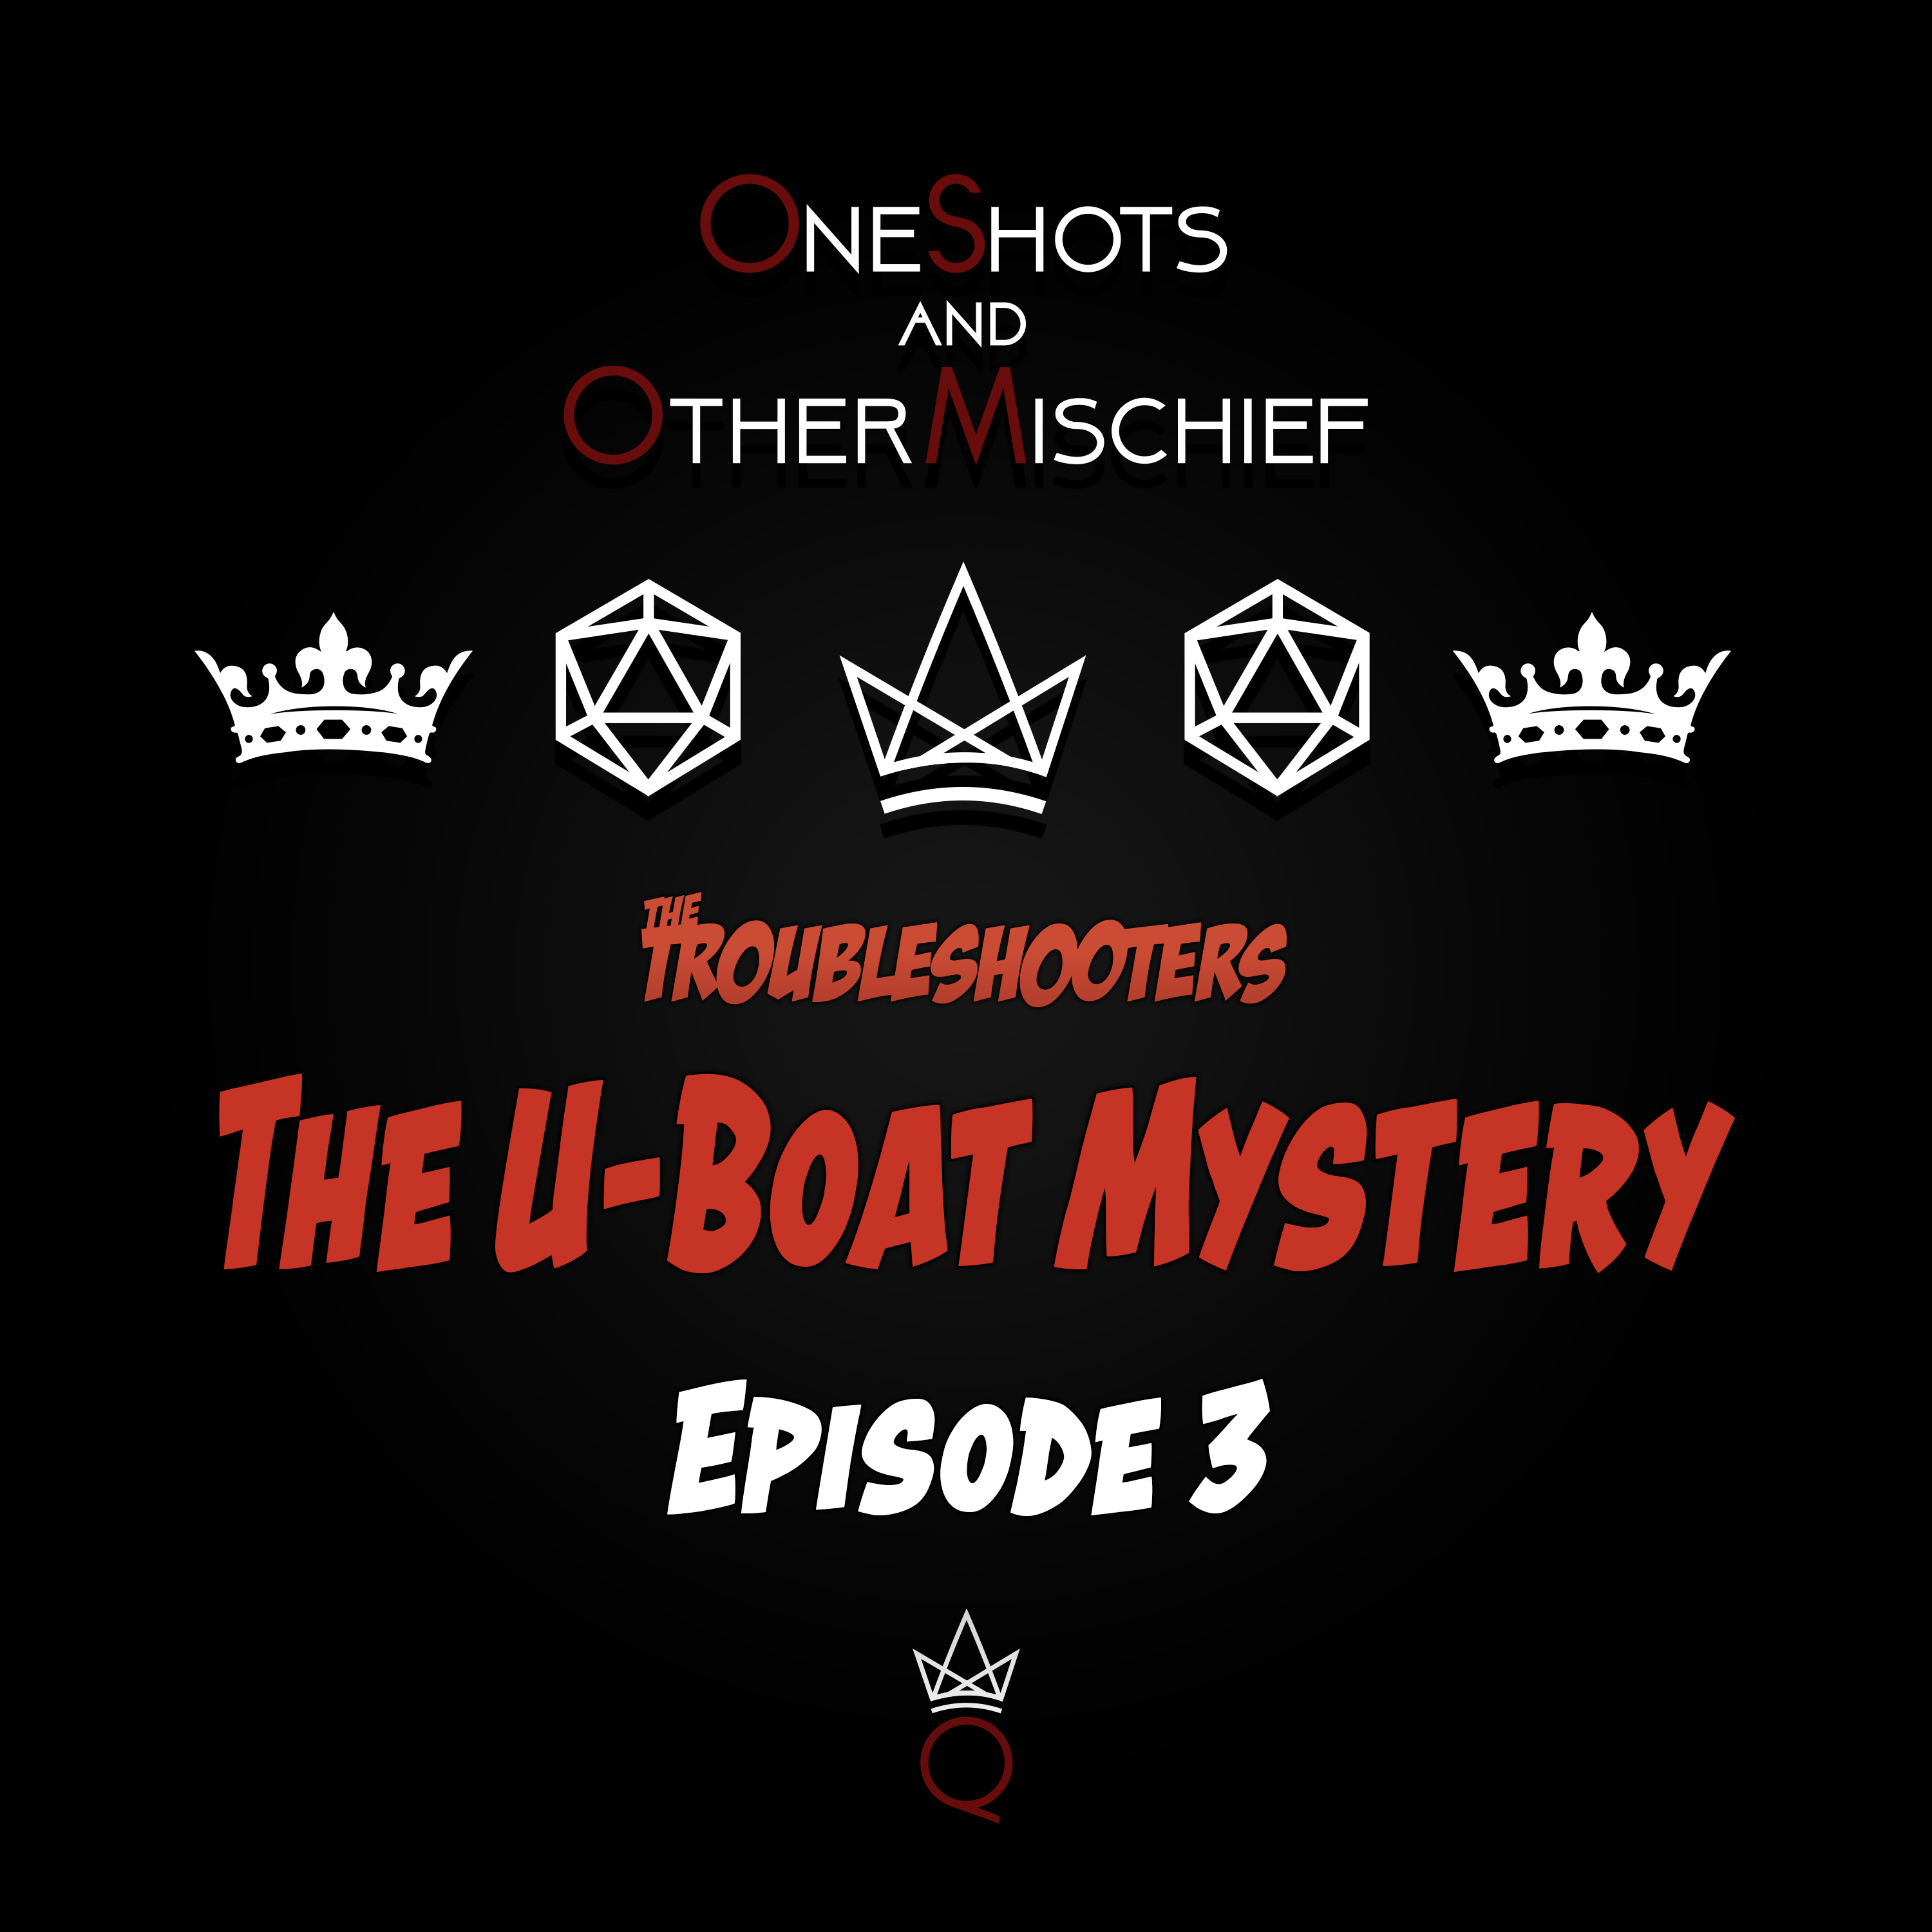 The Troubleshooters - The U-Boat Mystery, Episode 3